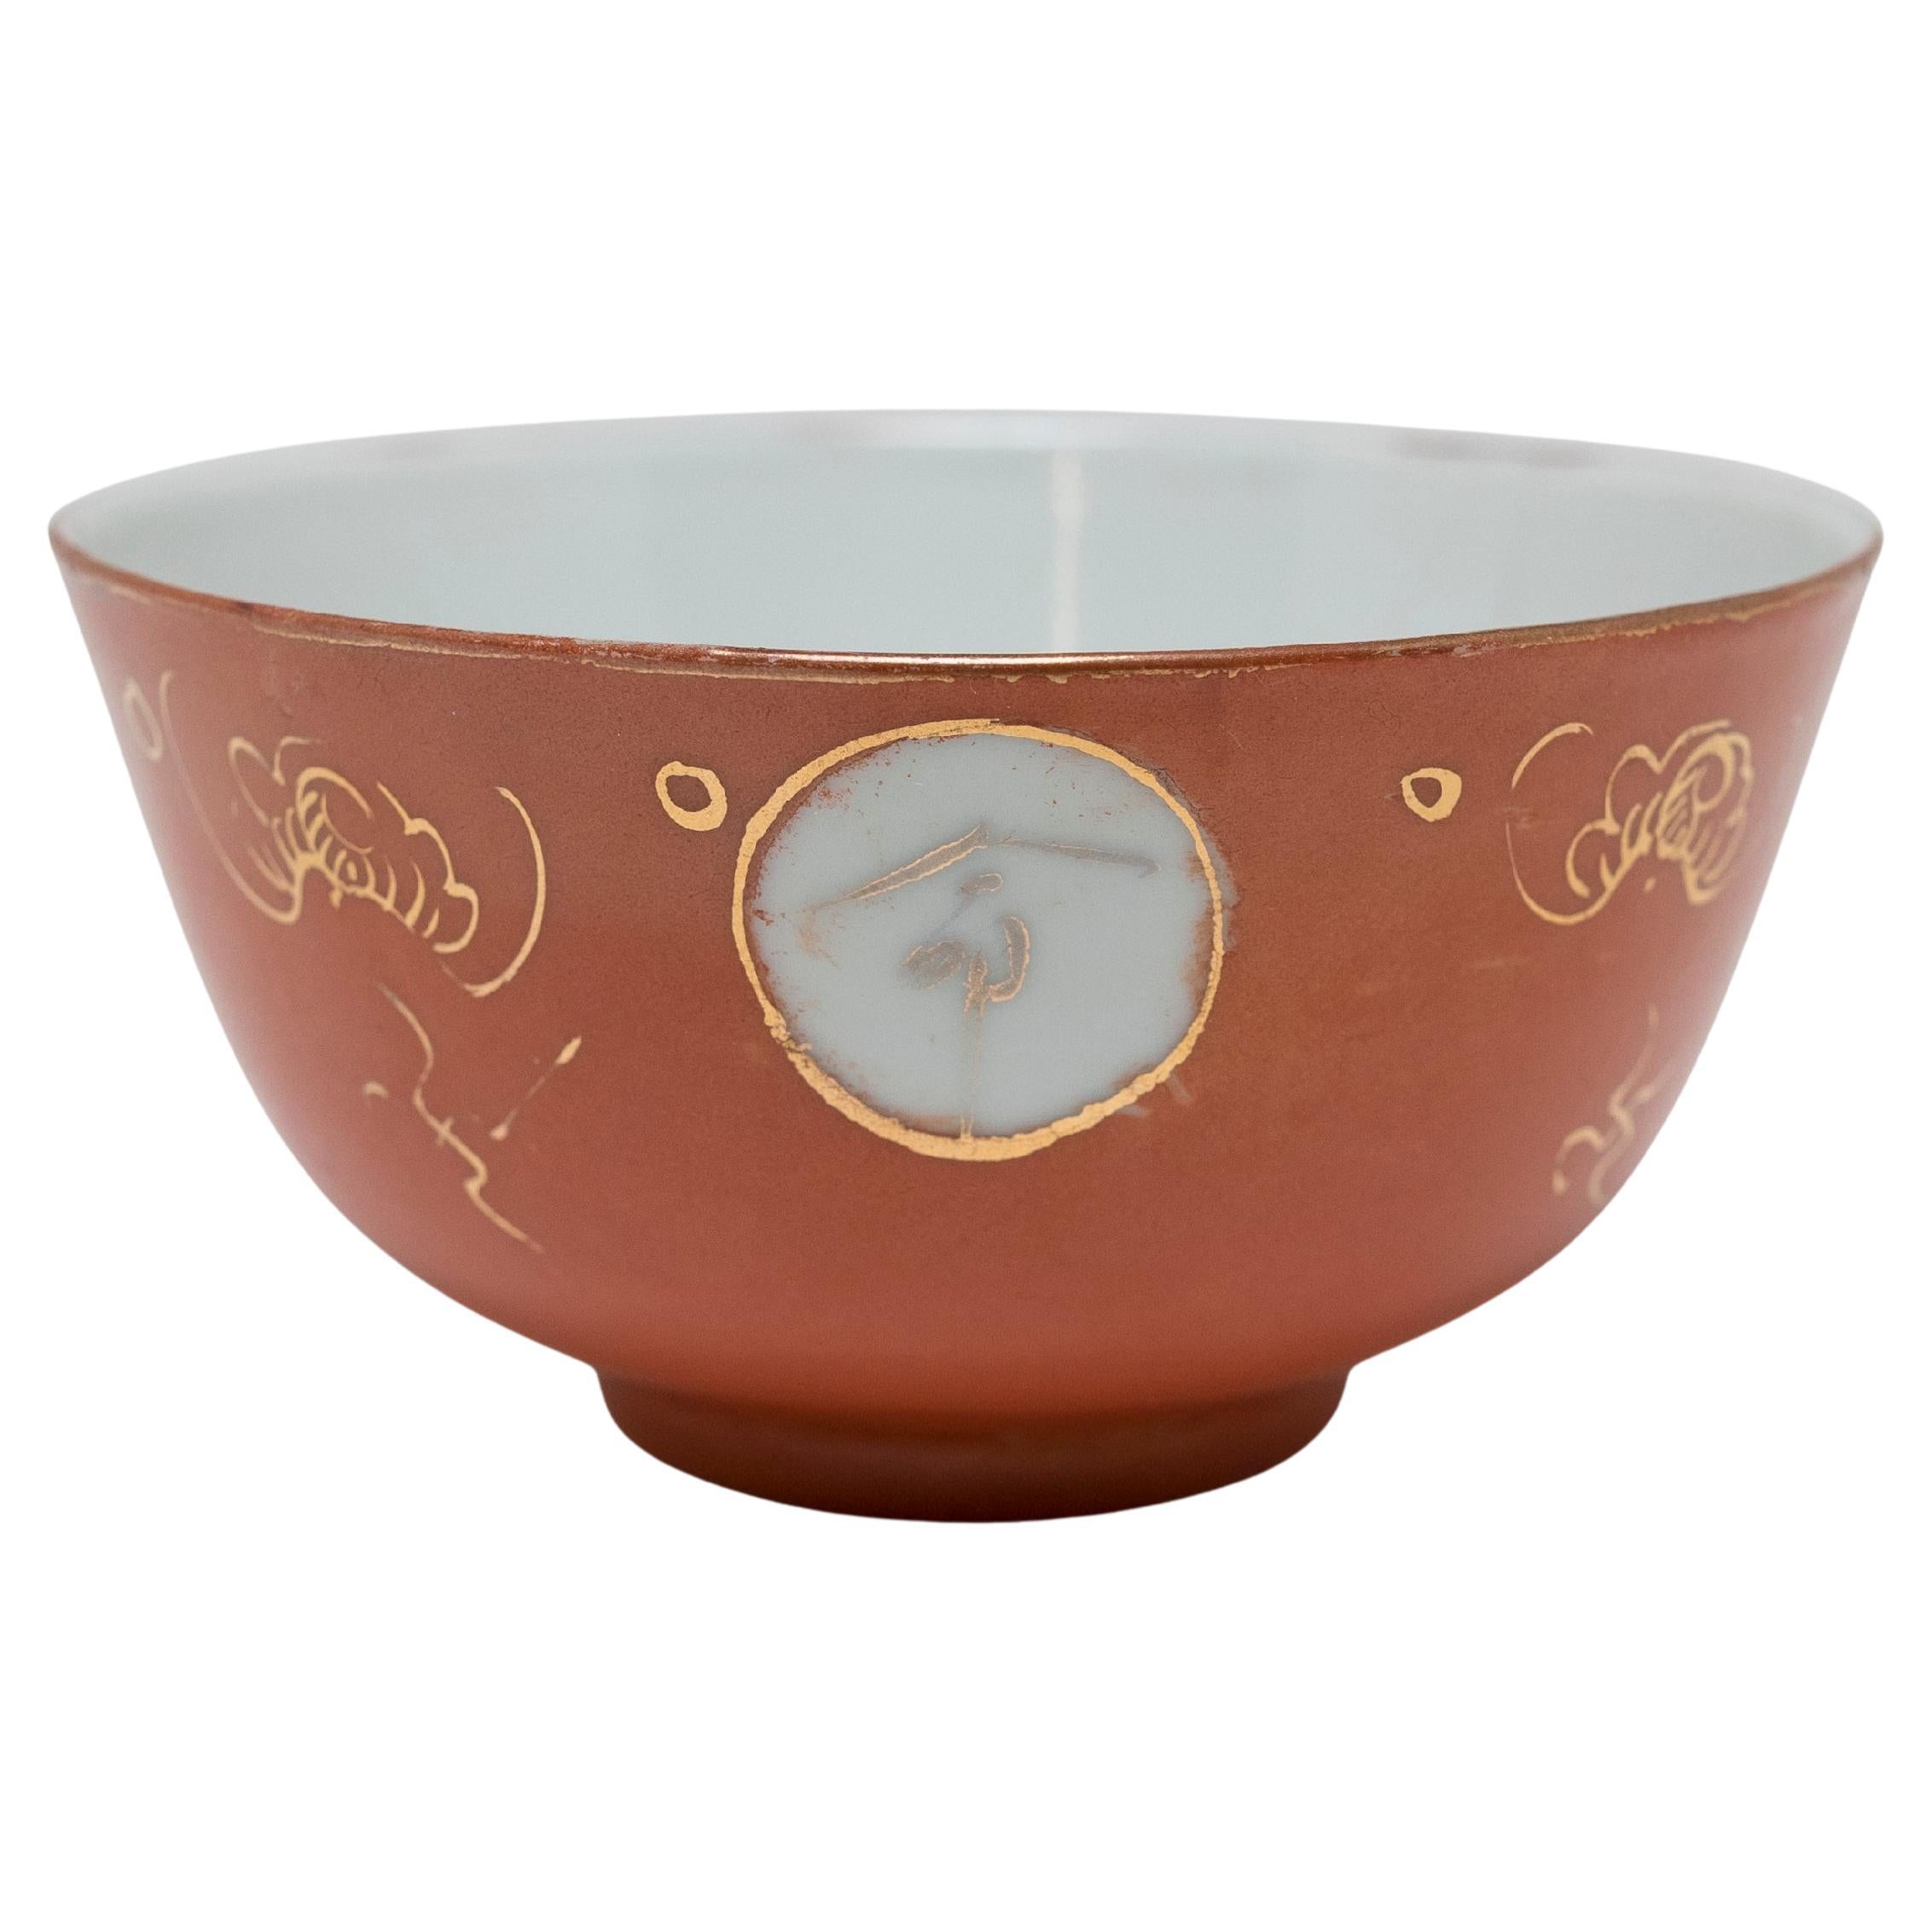 Gilt Chinese Persimmon Bowl